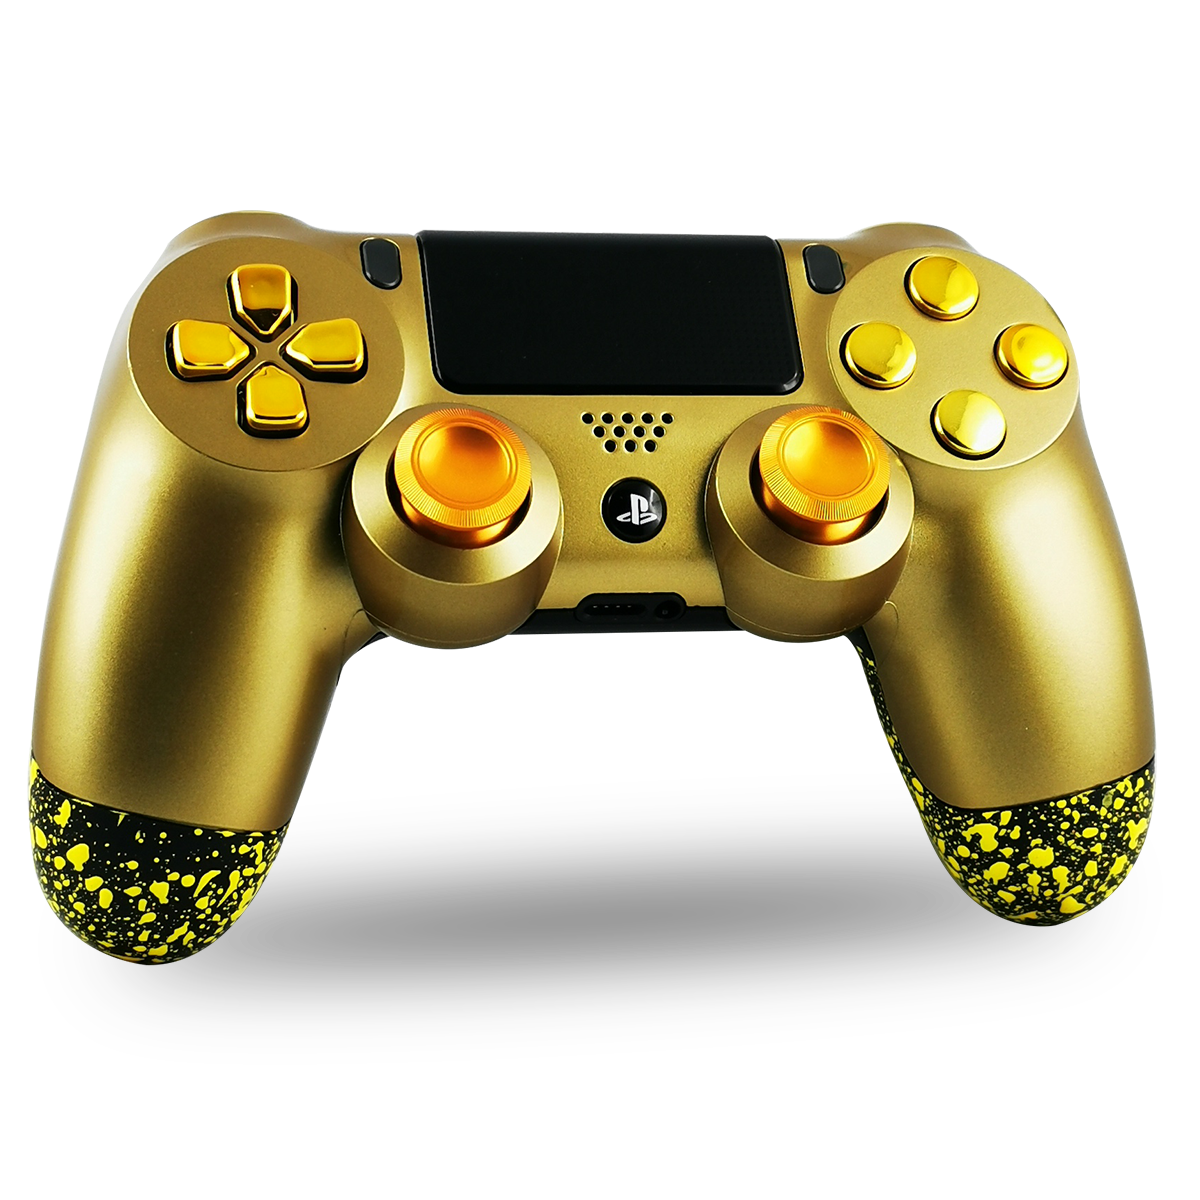 manette-PS4-custom-playstation-4-sony-personnalisee-drawmypad-gold-yellow